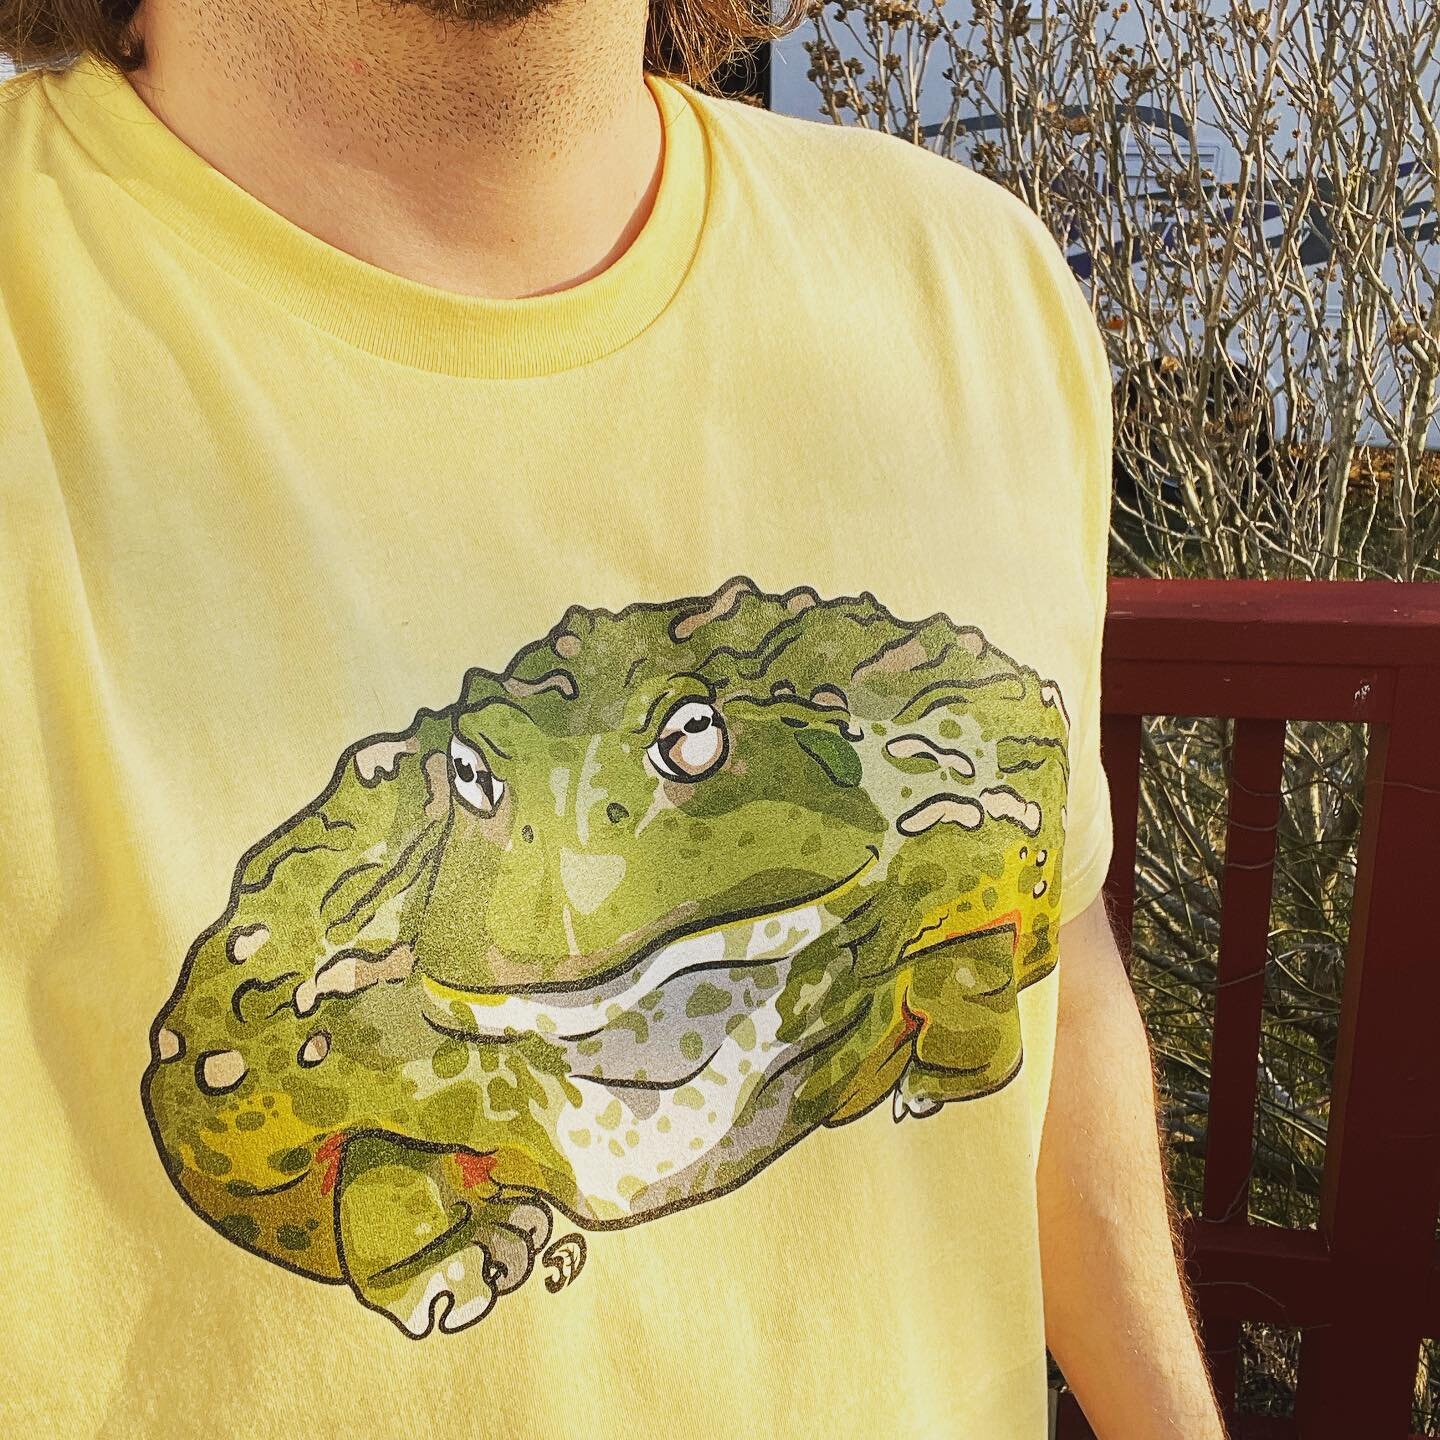 Super stoked to finally have my own Samson T-shirt from #serpadesign Thanks a lot Tanner. My whole family loves your channel. Modern day Bob Ross vibes. #swag #frog #terrarium #youtube #respect @serpadesign